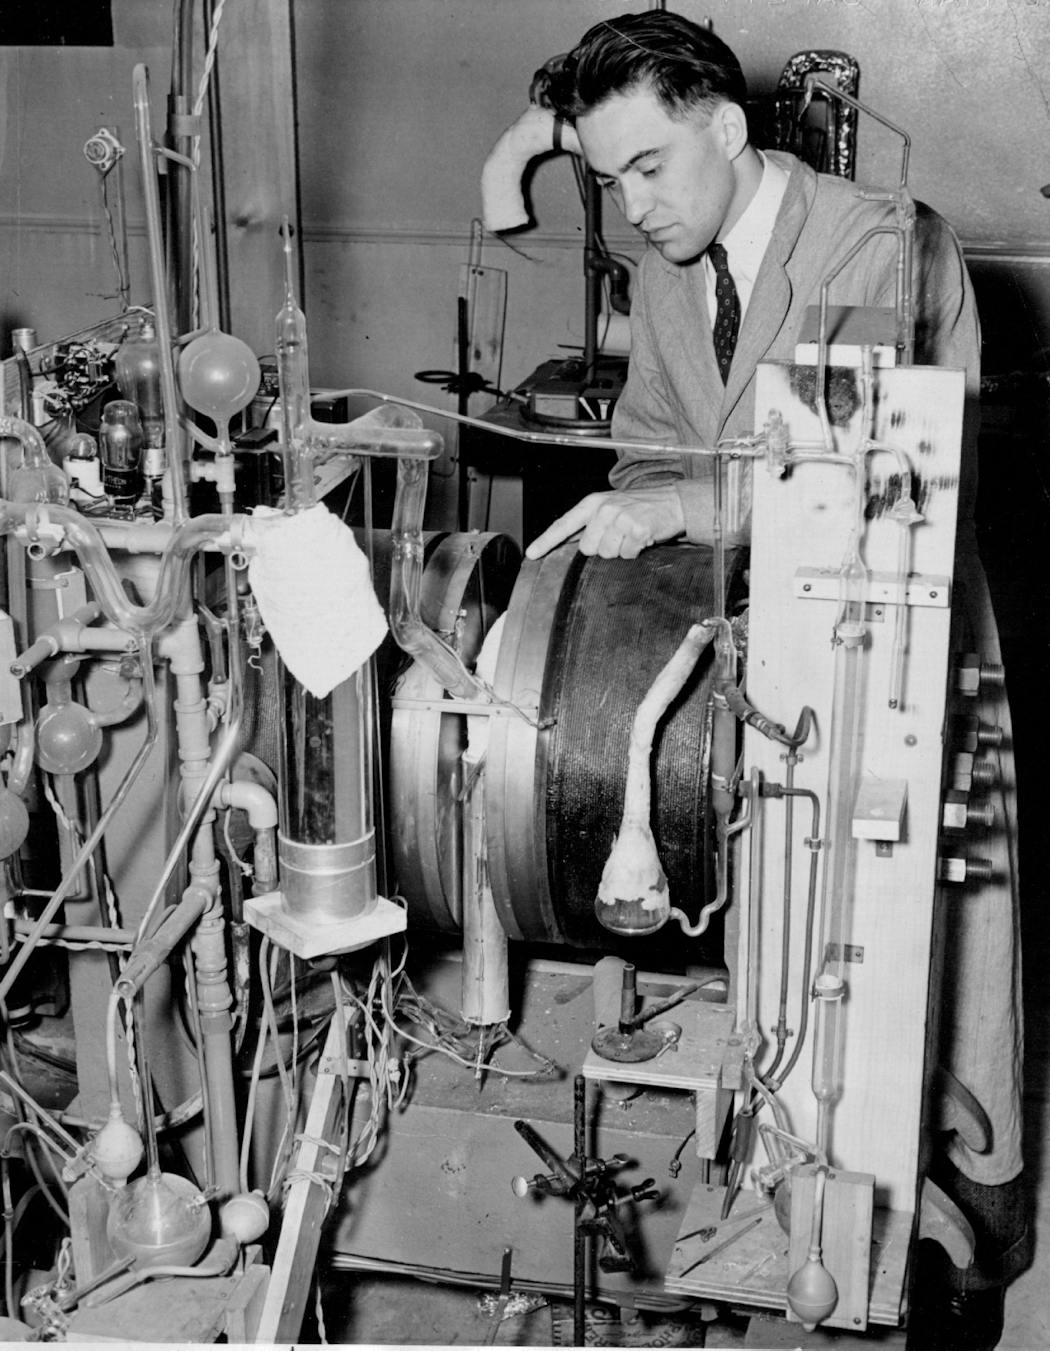 University of Minnesota Physicist Alfred Nier working on a mass spectrometer in 1940.